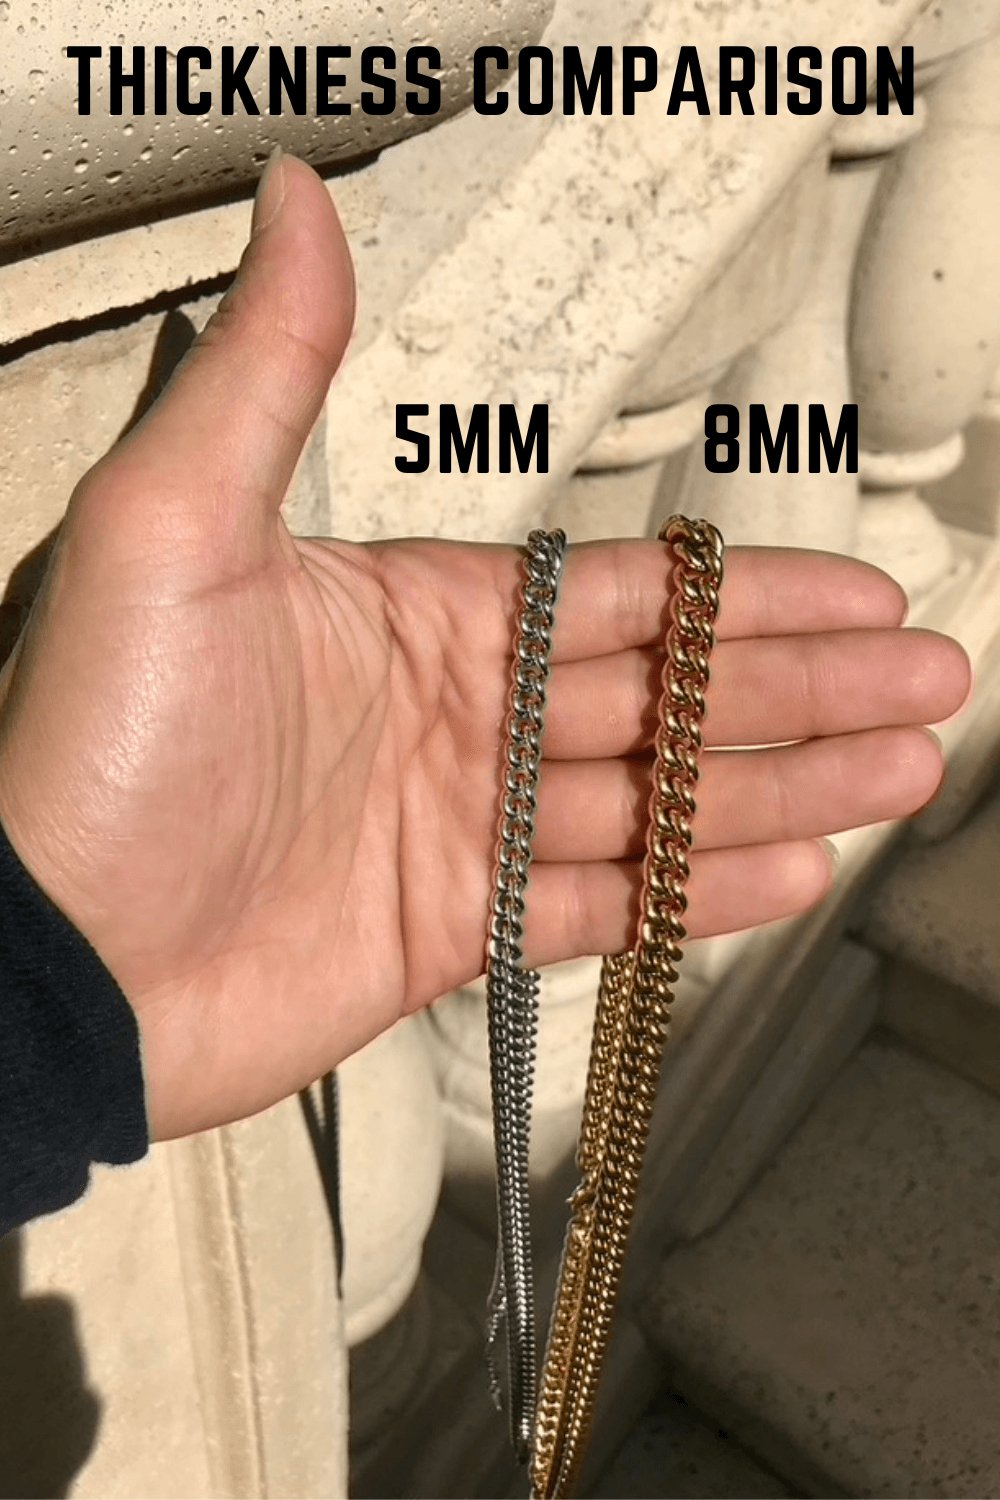 5mm vs 8mm chain thicknesses